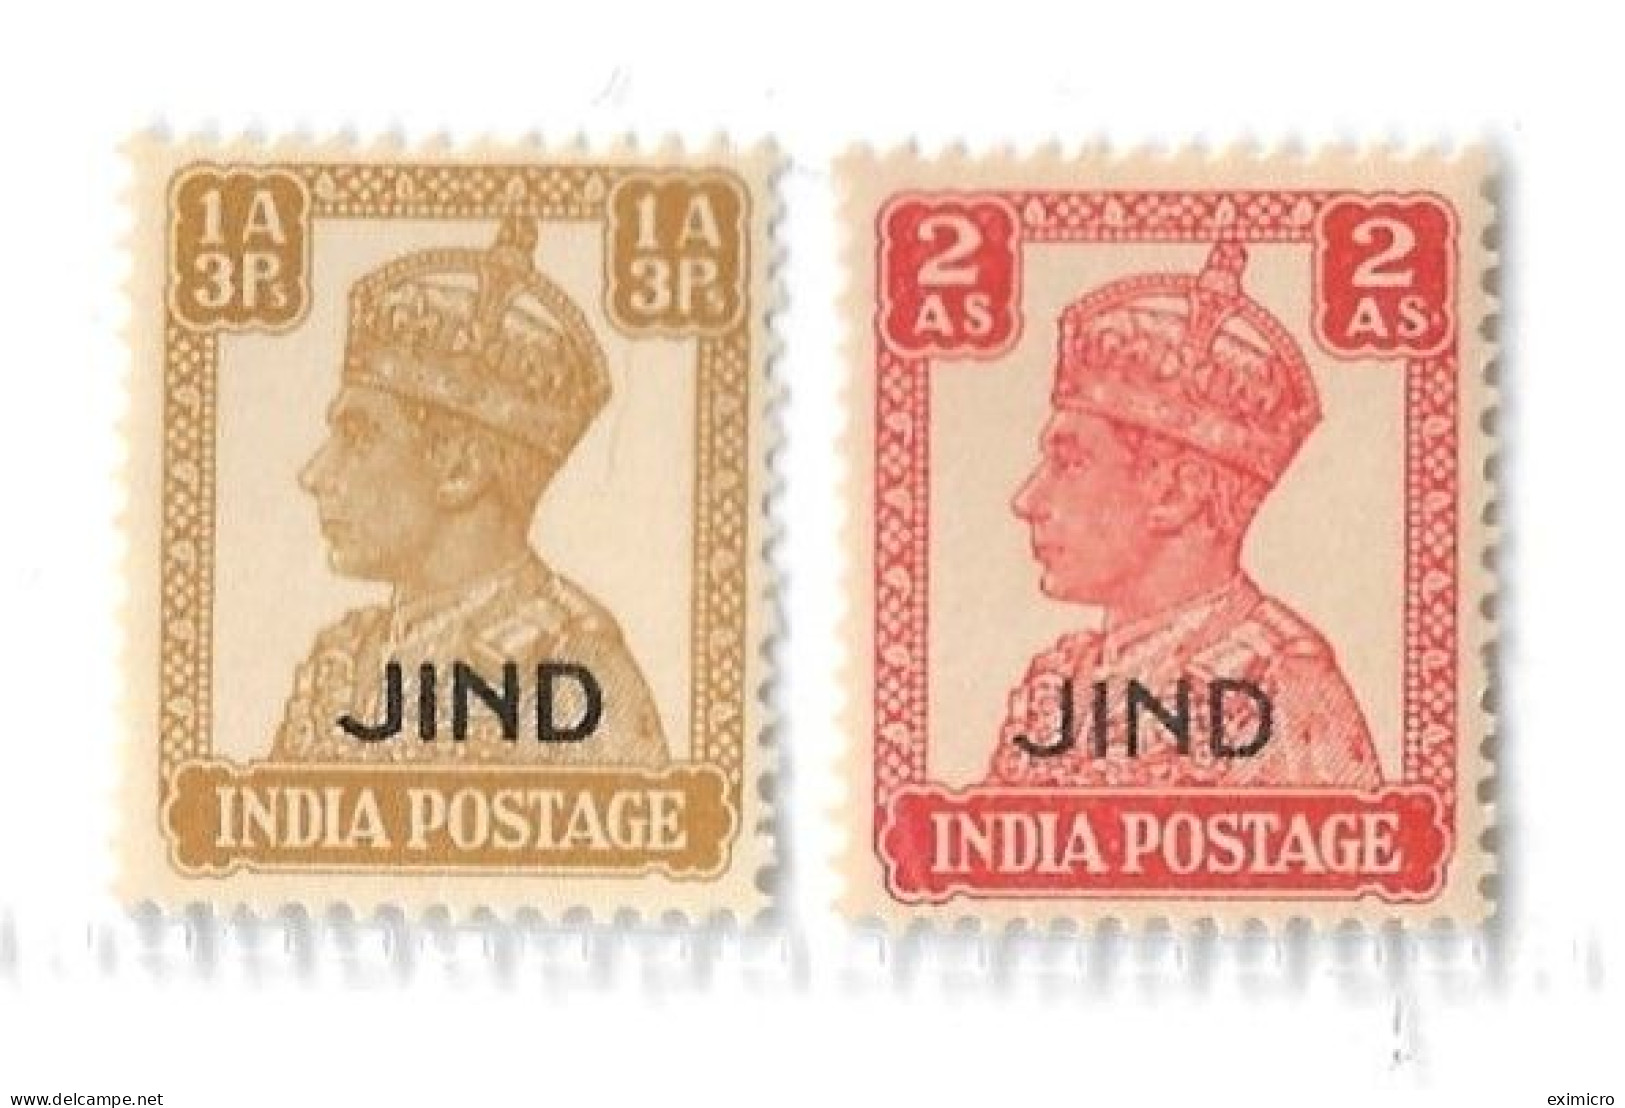 INDIA - JIND 1941 - 1943 1a 3p, 2a SG 141, 143 UNMOUNTED MINT - Jhind